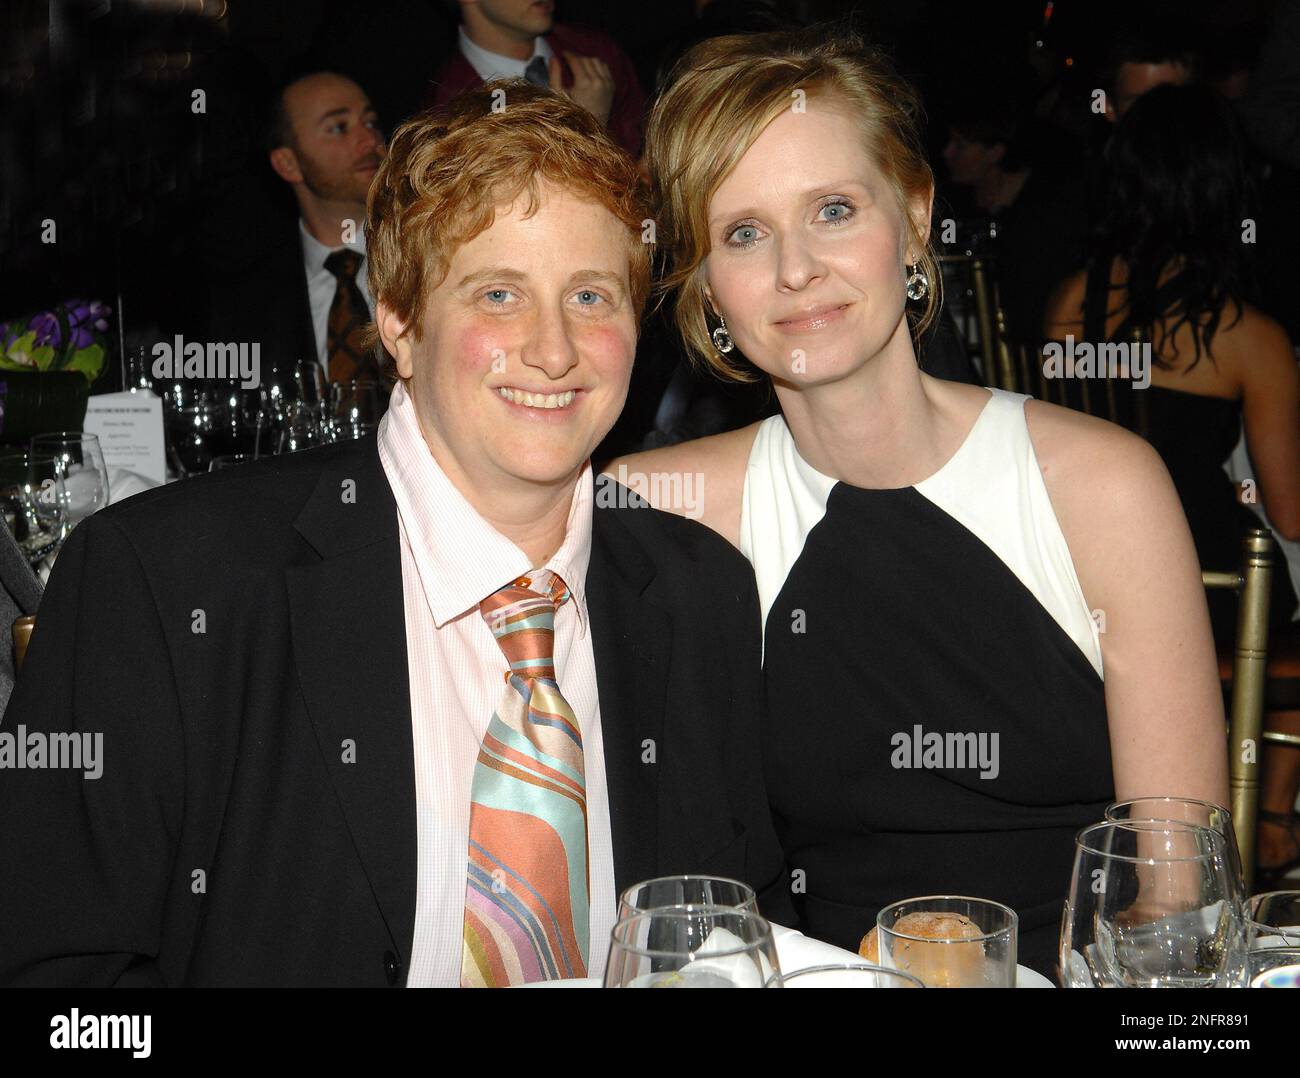 Actress Cynthia Nixon, right, and life partner Christine Marinoni attends the Point Foundation Honors benefit dinner at Capitale, Monday, April 7, 2008 in New York pic